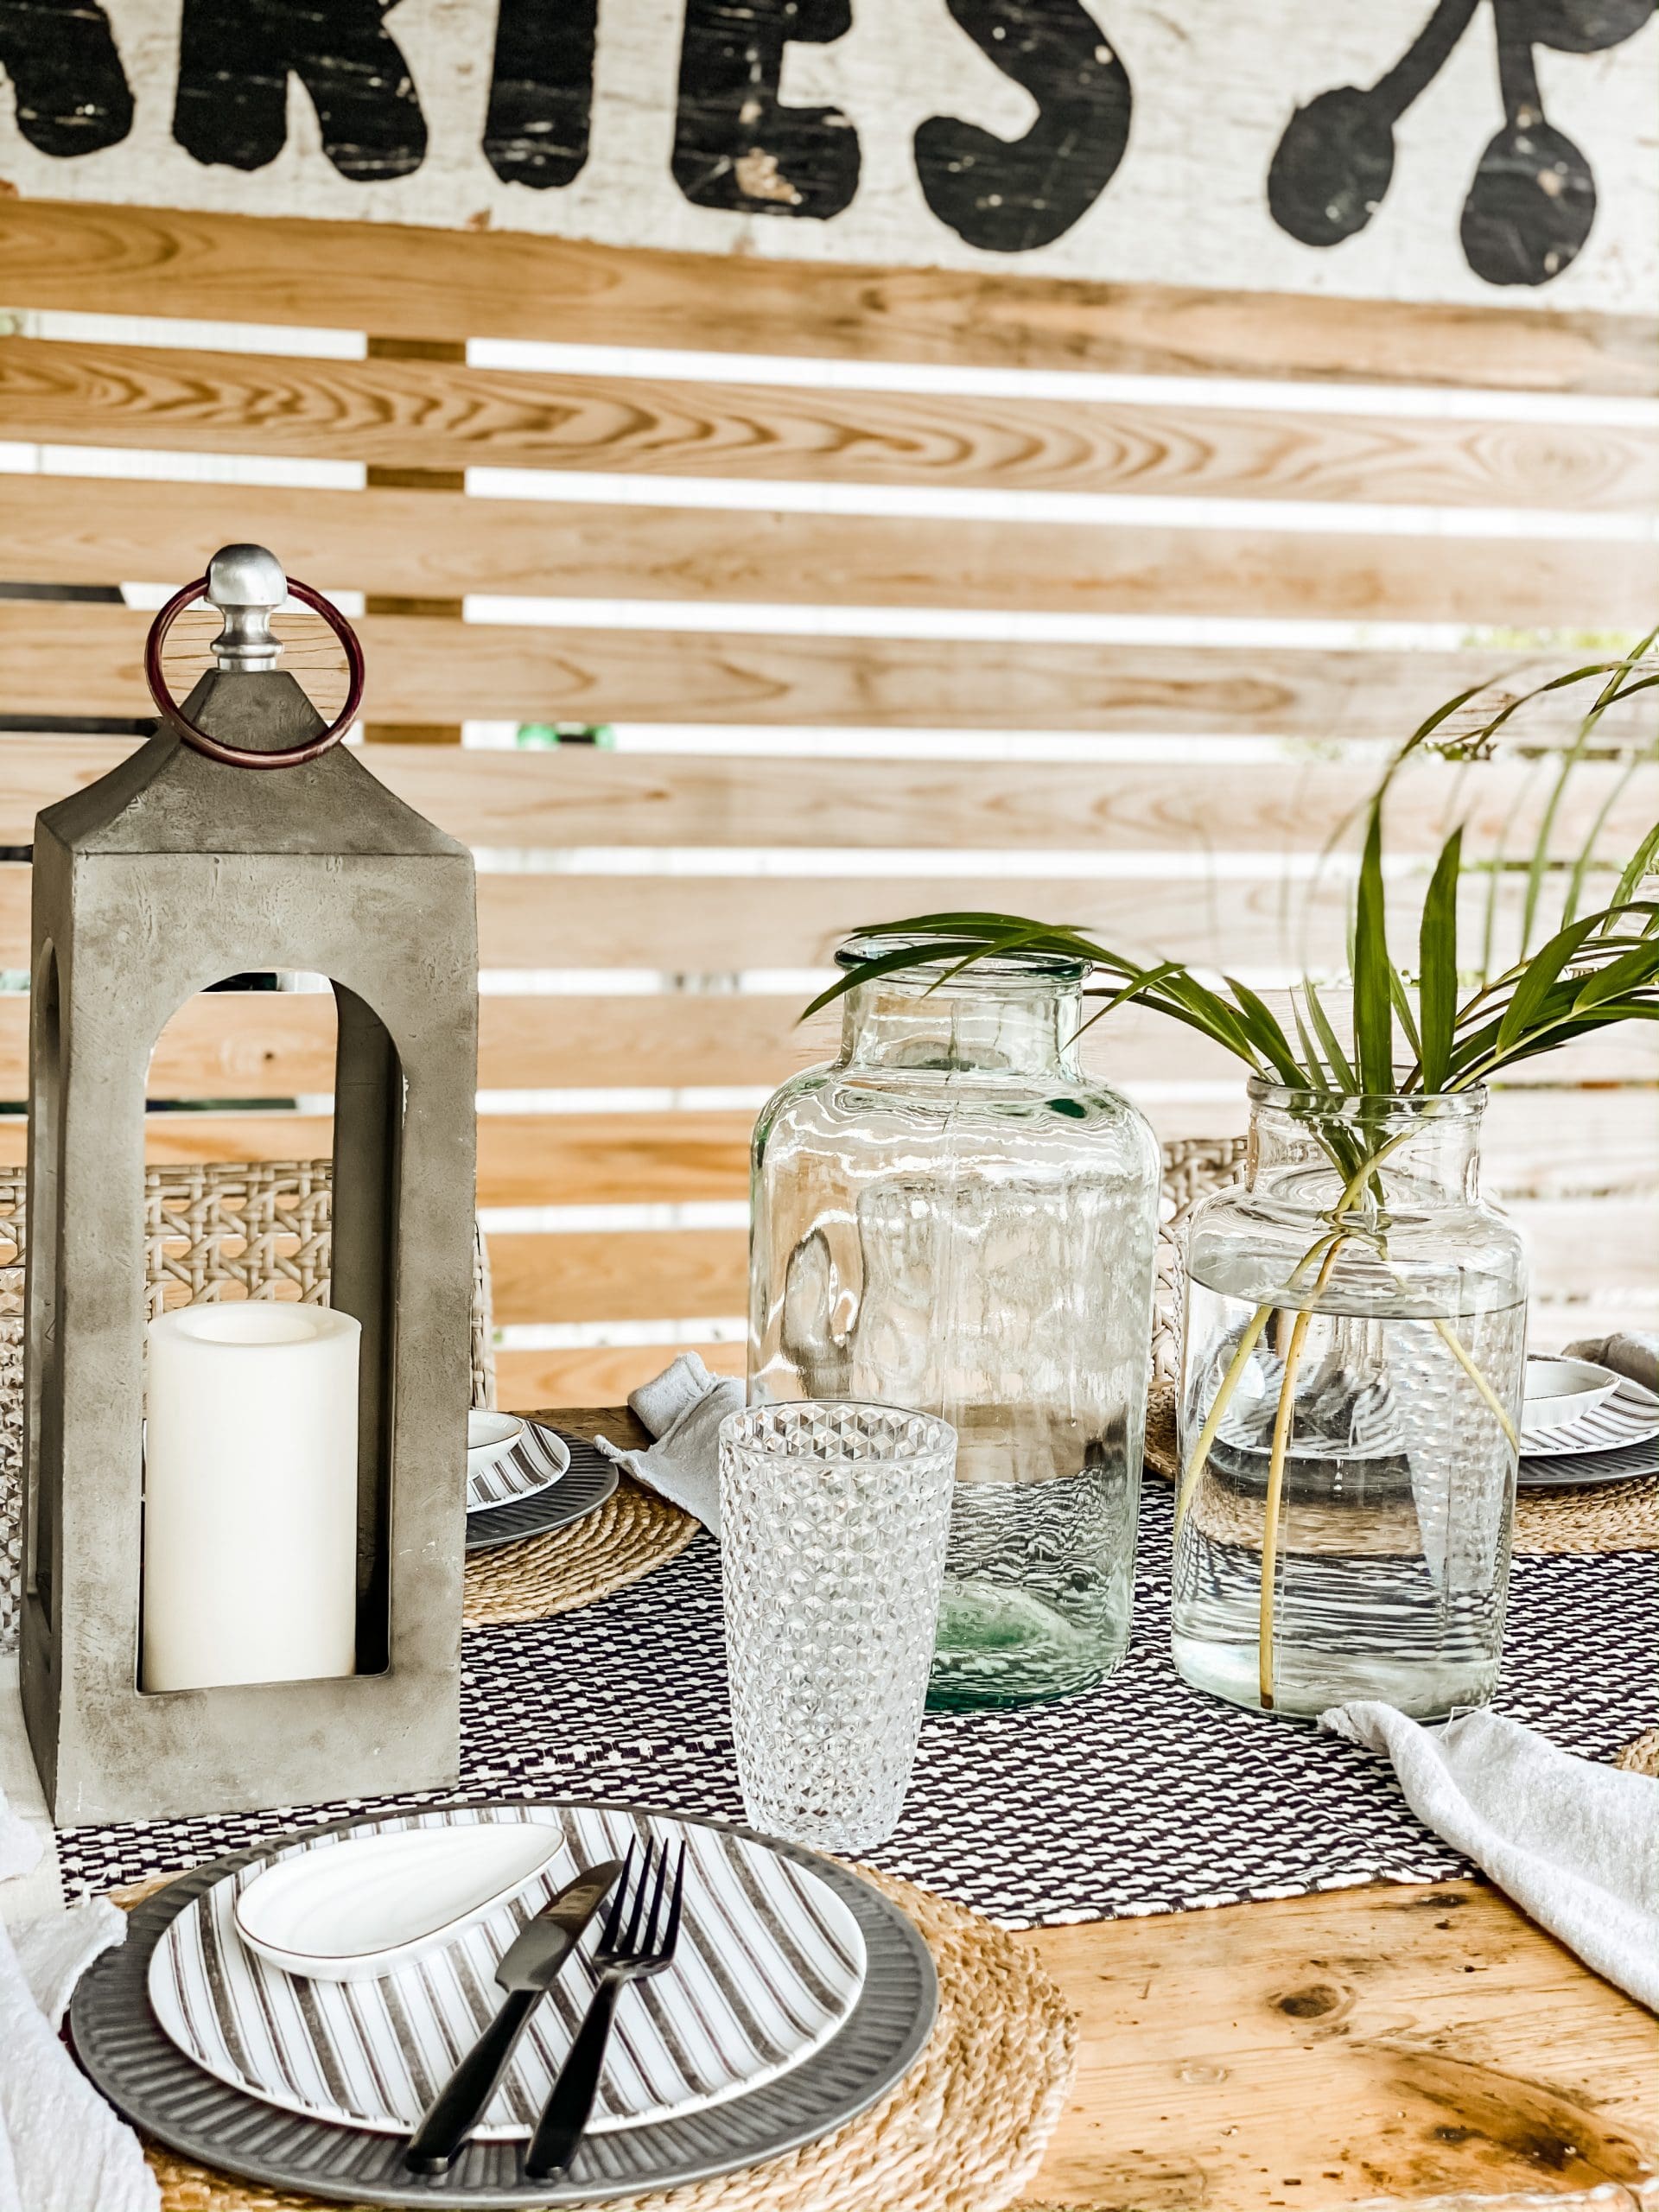 How to Create an Outdoor Dining Space: 5 Easy Tips